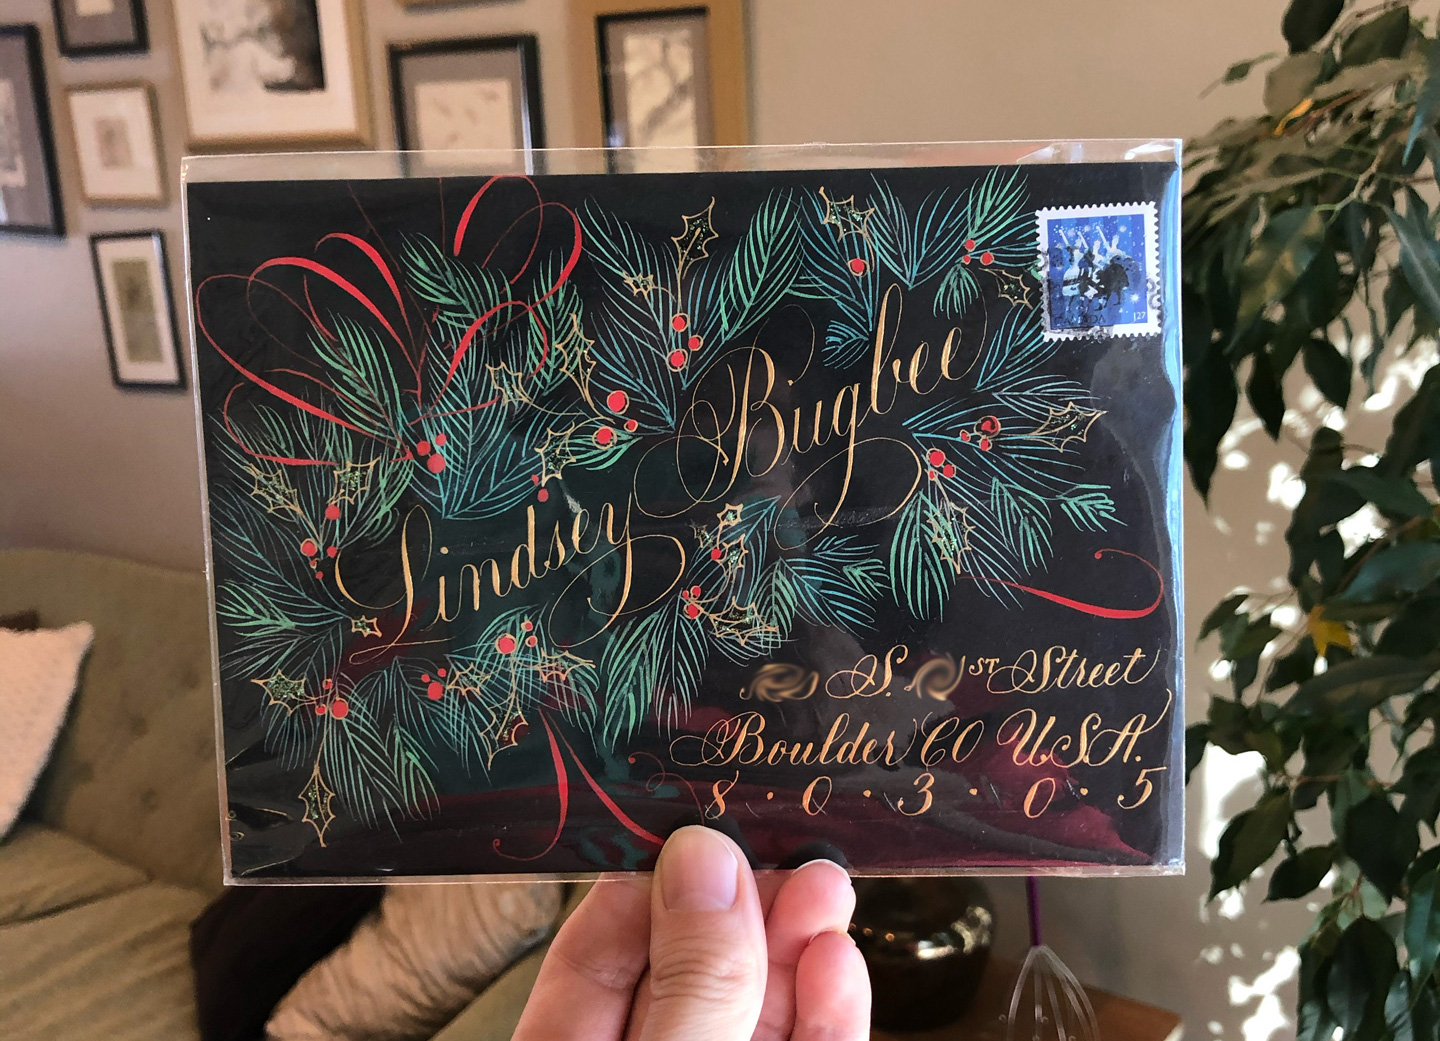 Festive Bough Calligraphy Flourish Tutorial by Phyllis Macaluso